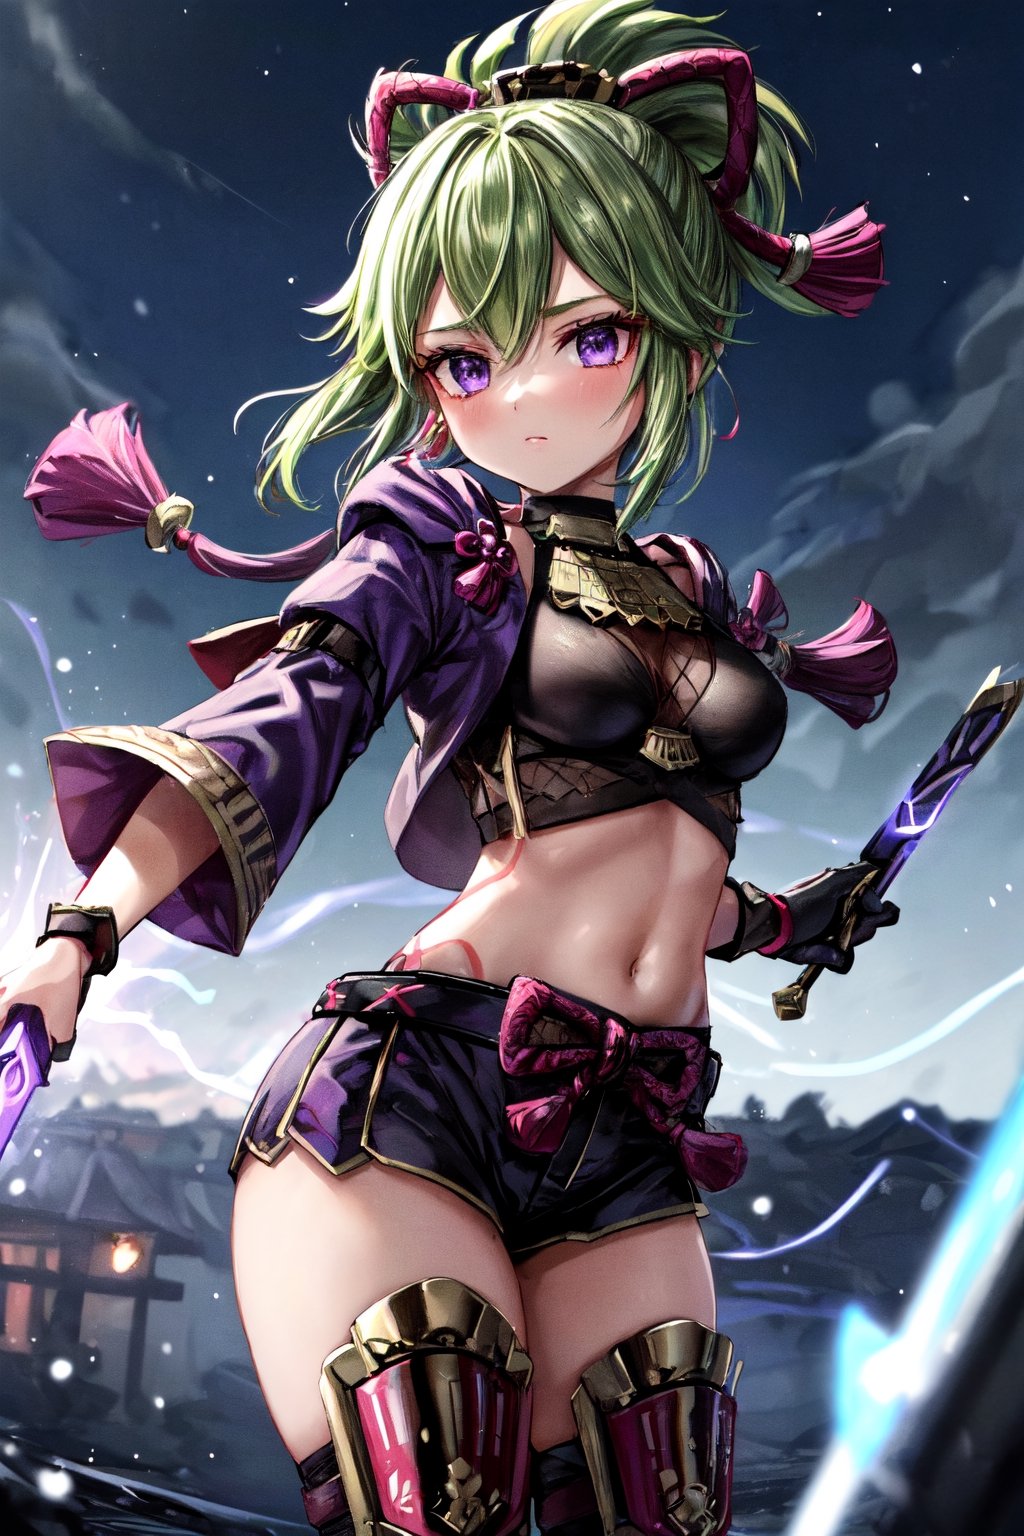 kukishinobudef, she is in a battle pose with his purple dagger, his dagger is imbued with electro energy, in a silent night where the night light illuminates the scene, ultra detailed.